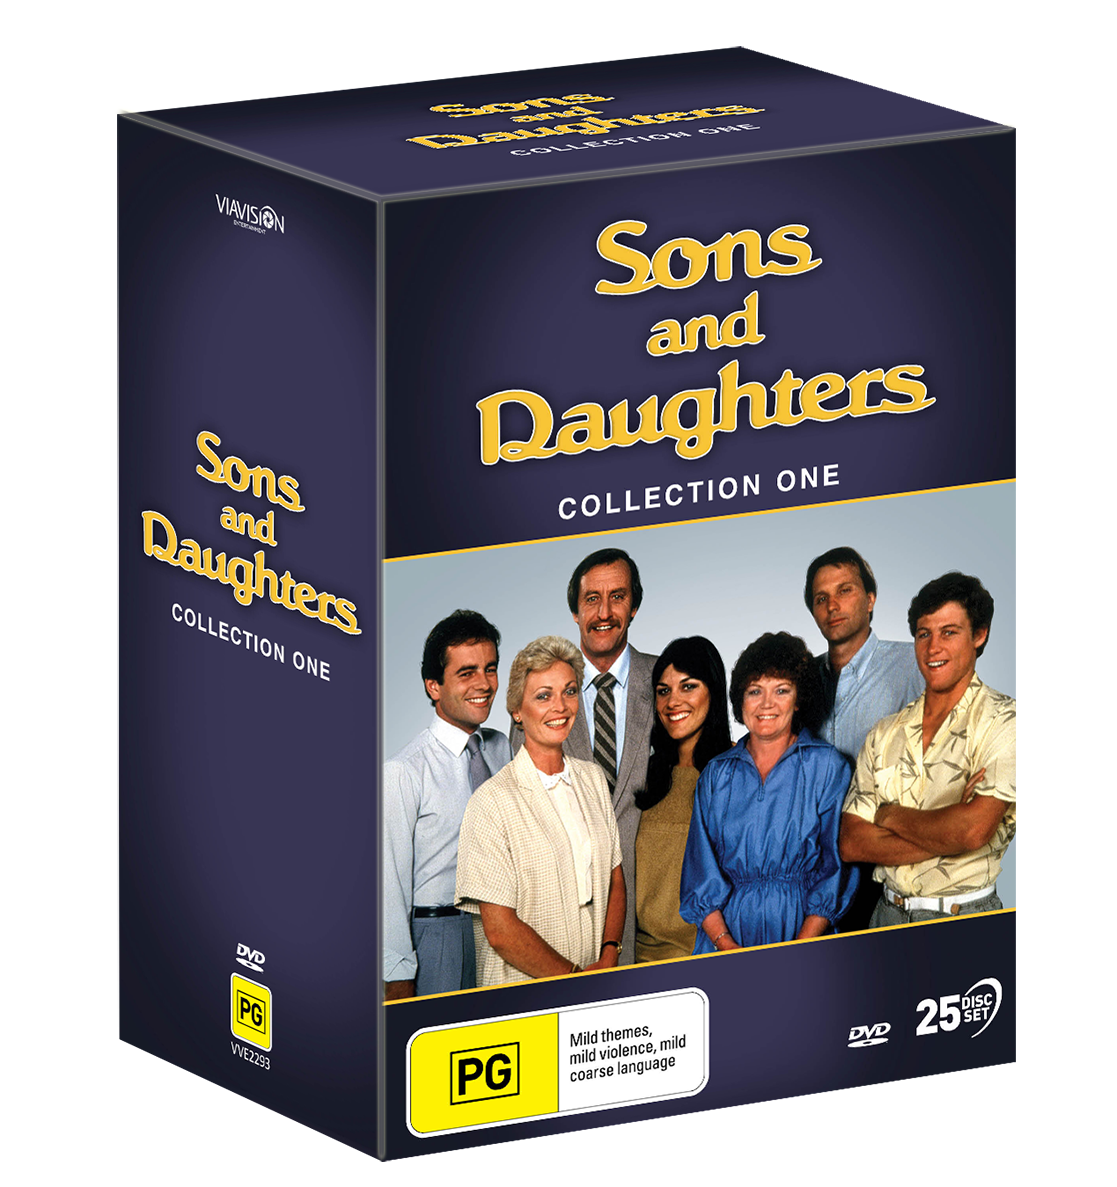 Sons And Daughters Collection One Via Vision Entertainment 5549